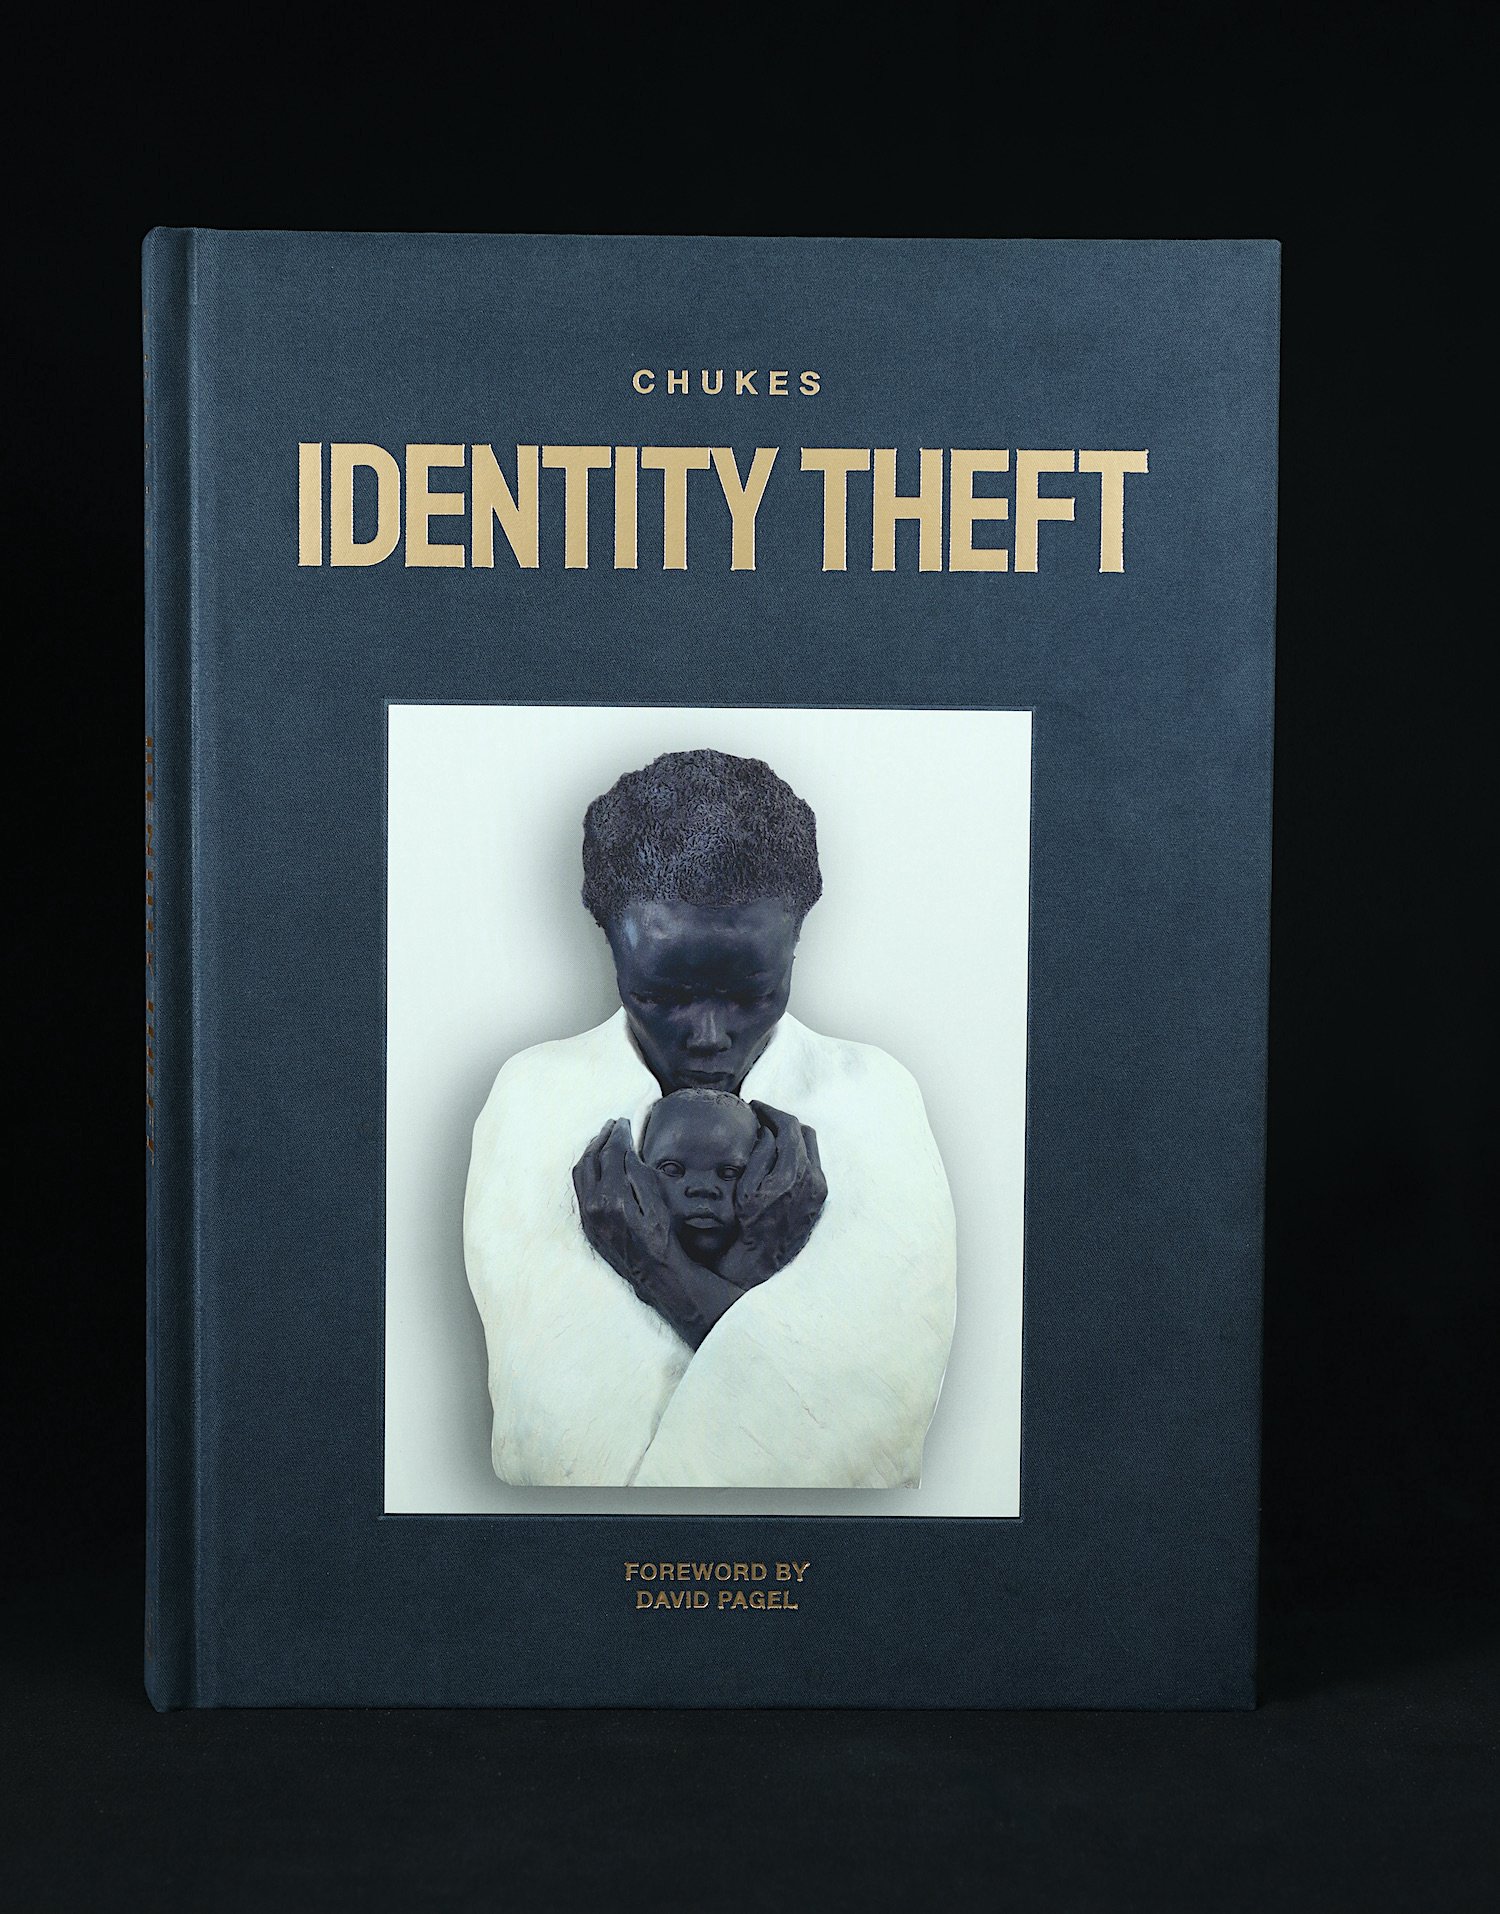 Identity Theft, the book by Chukes